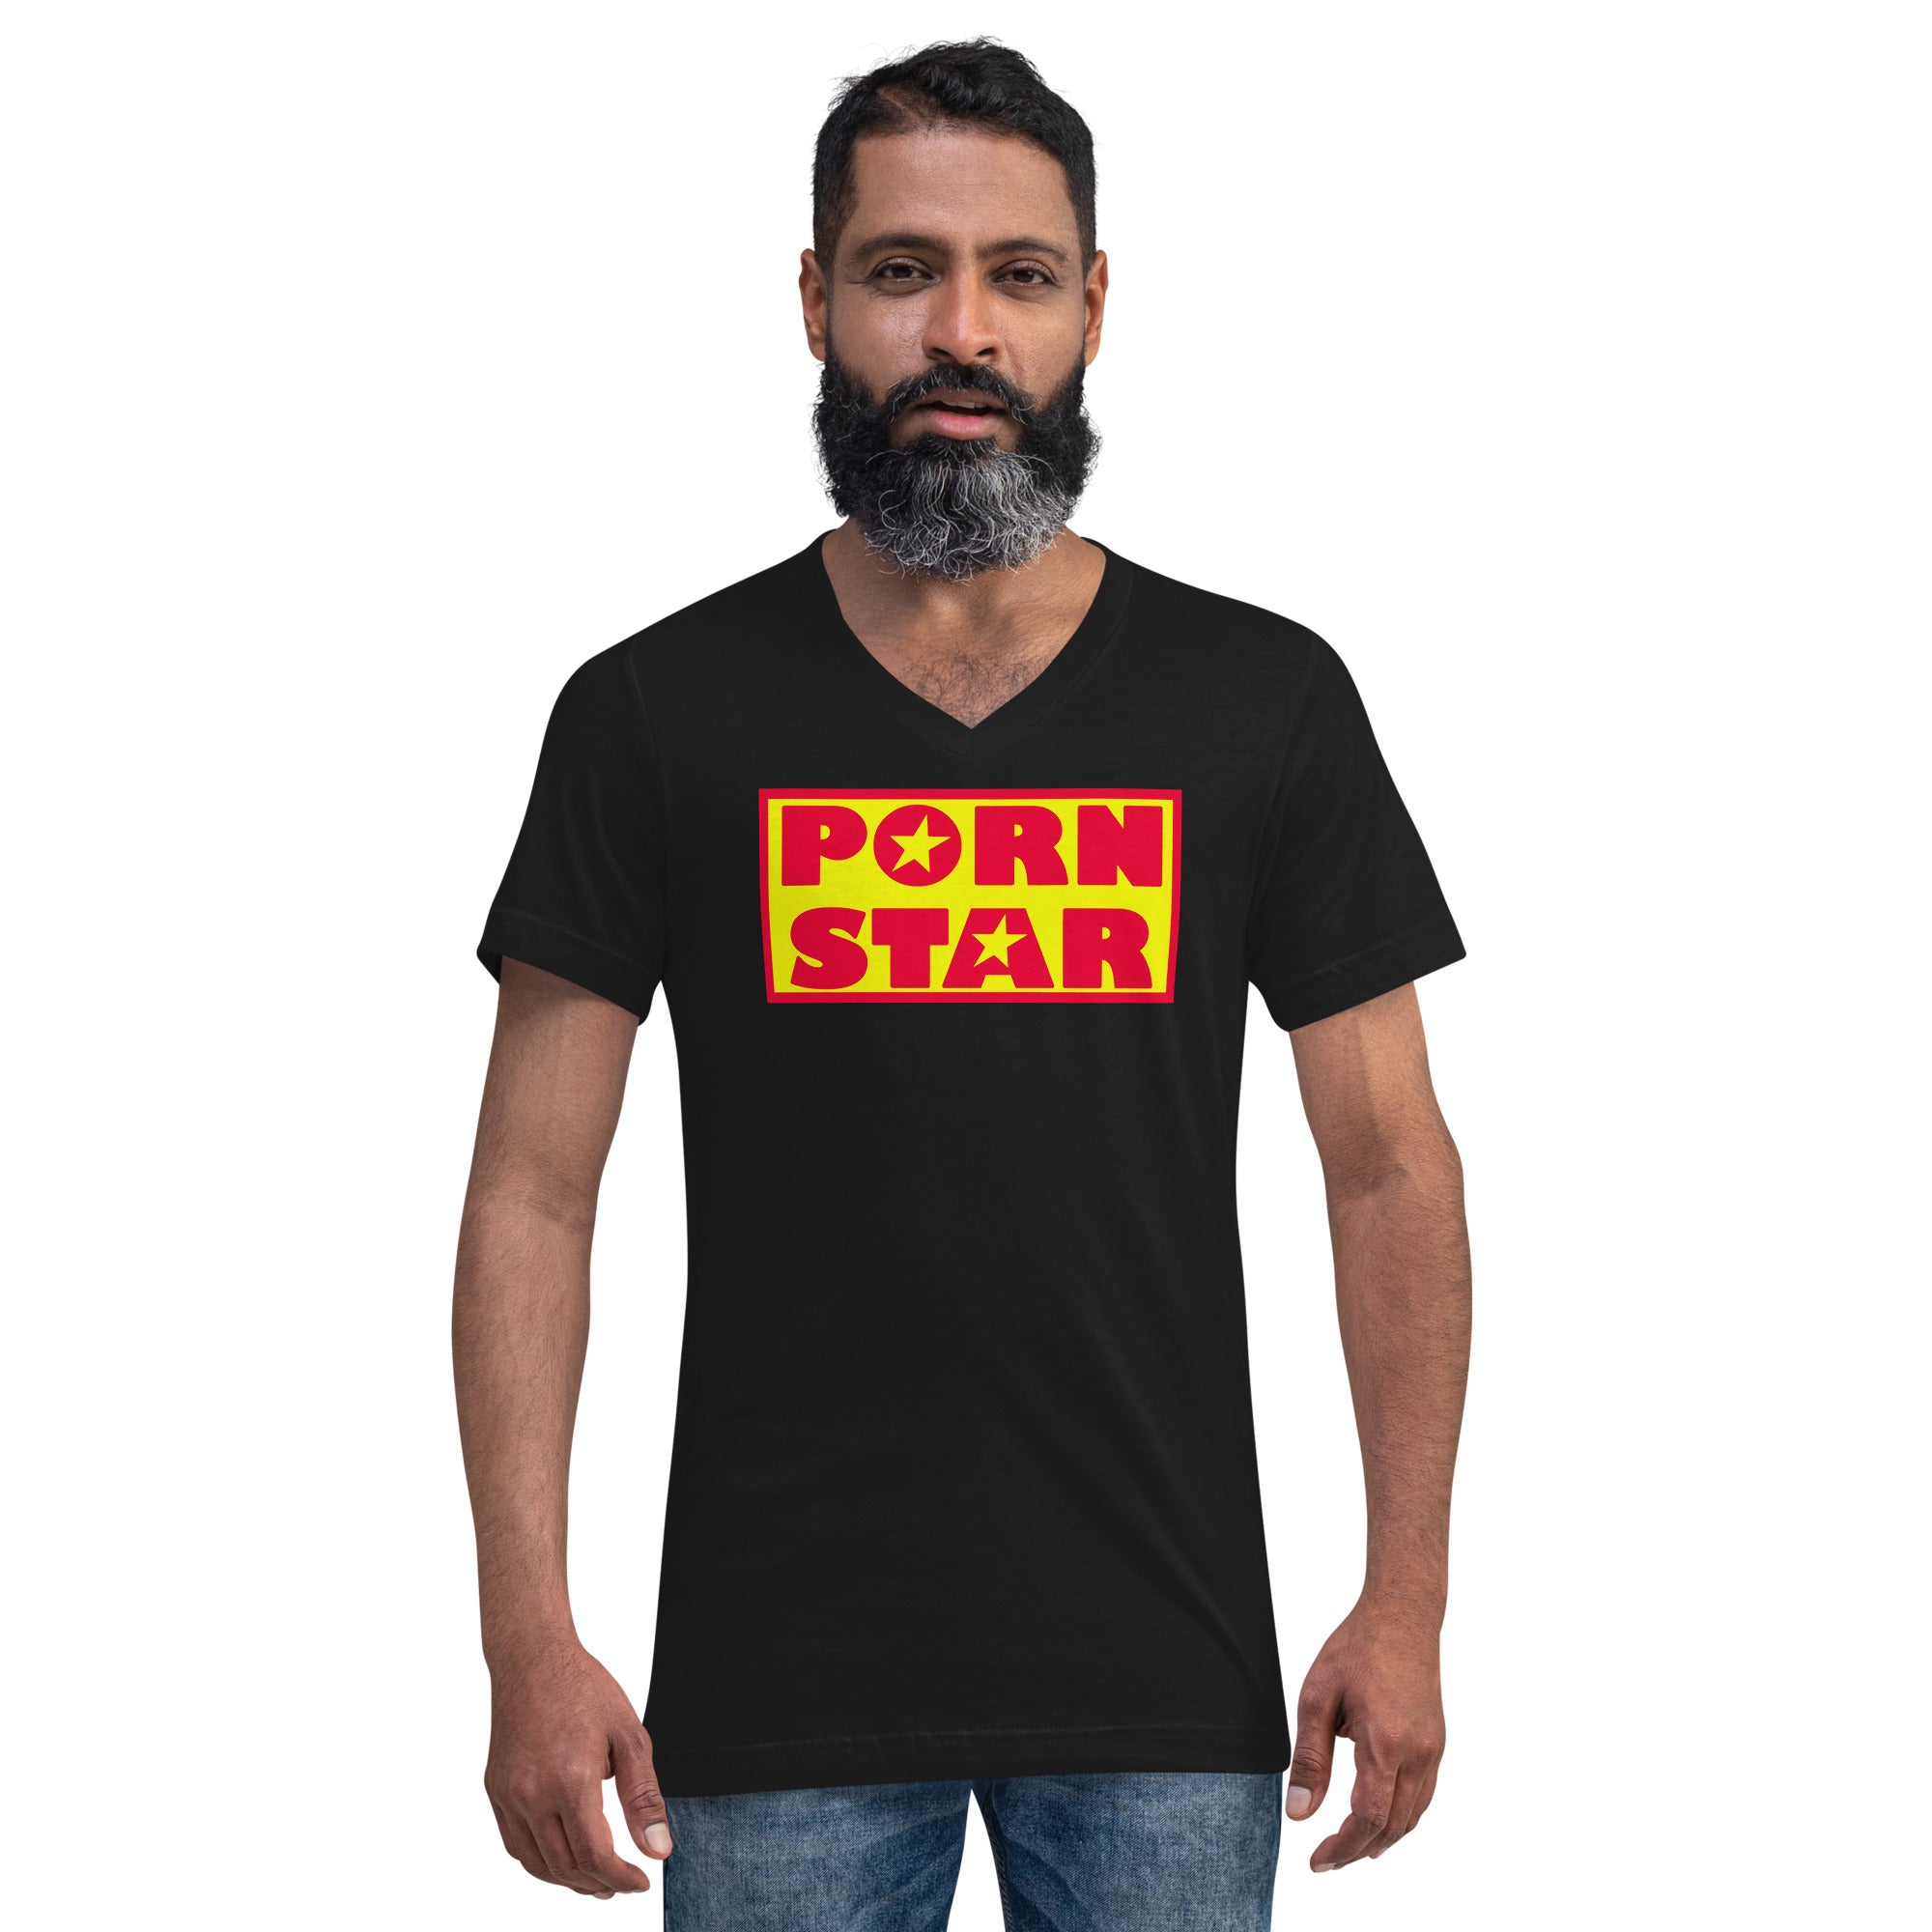 Yellow and Red Porn Star Logo Short Sleeve V-Neck T-Shirt